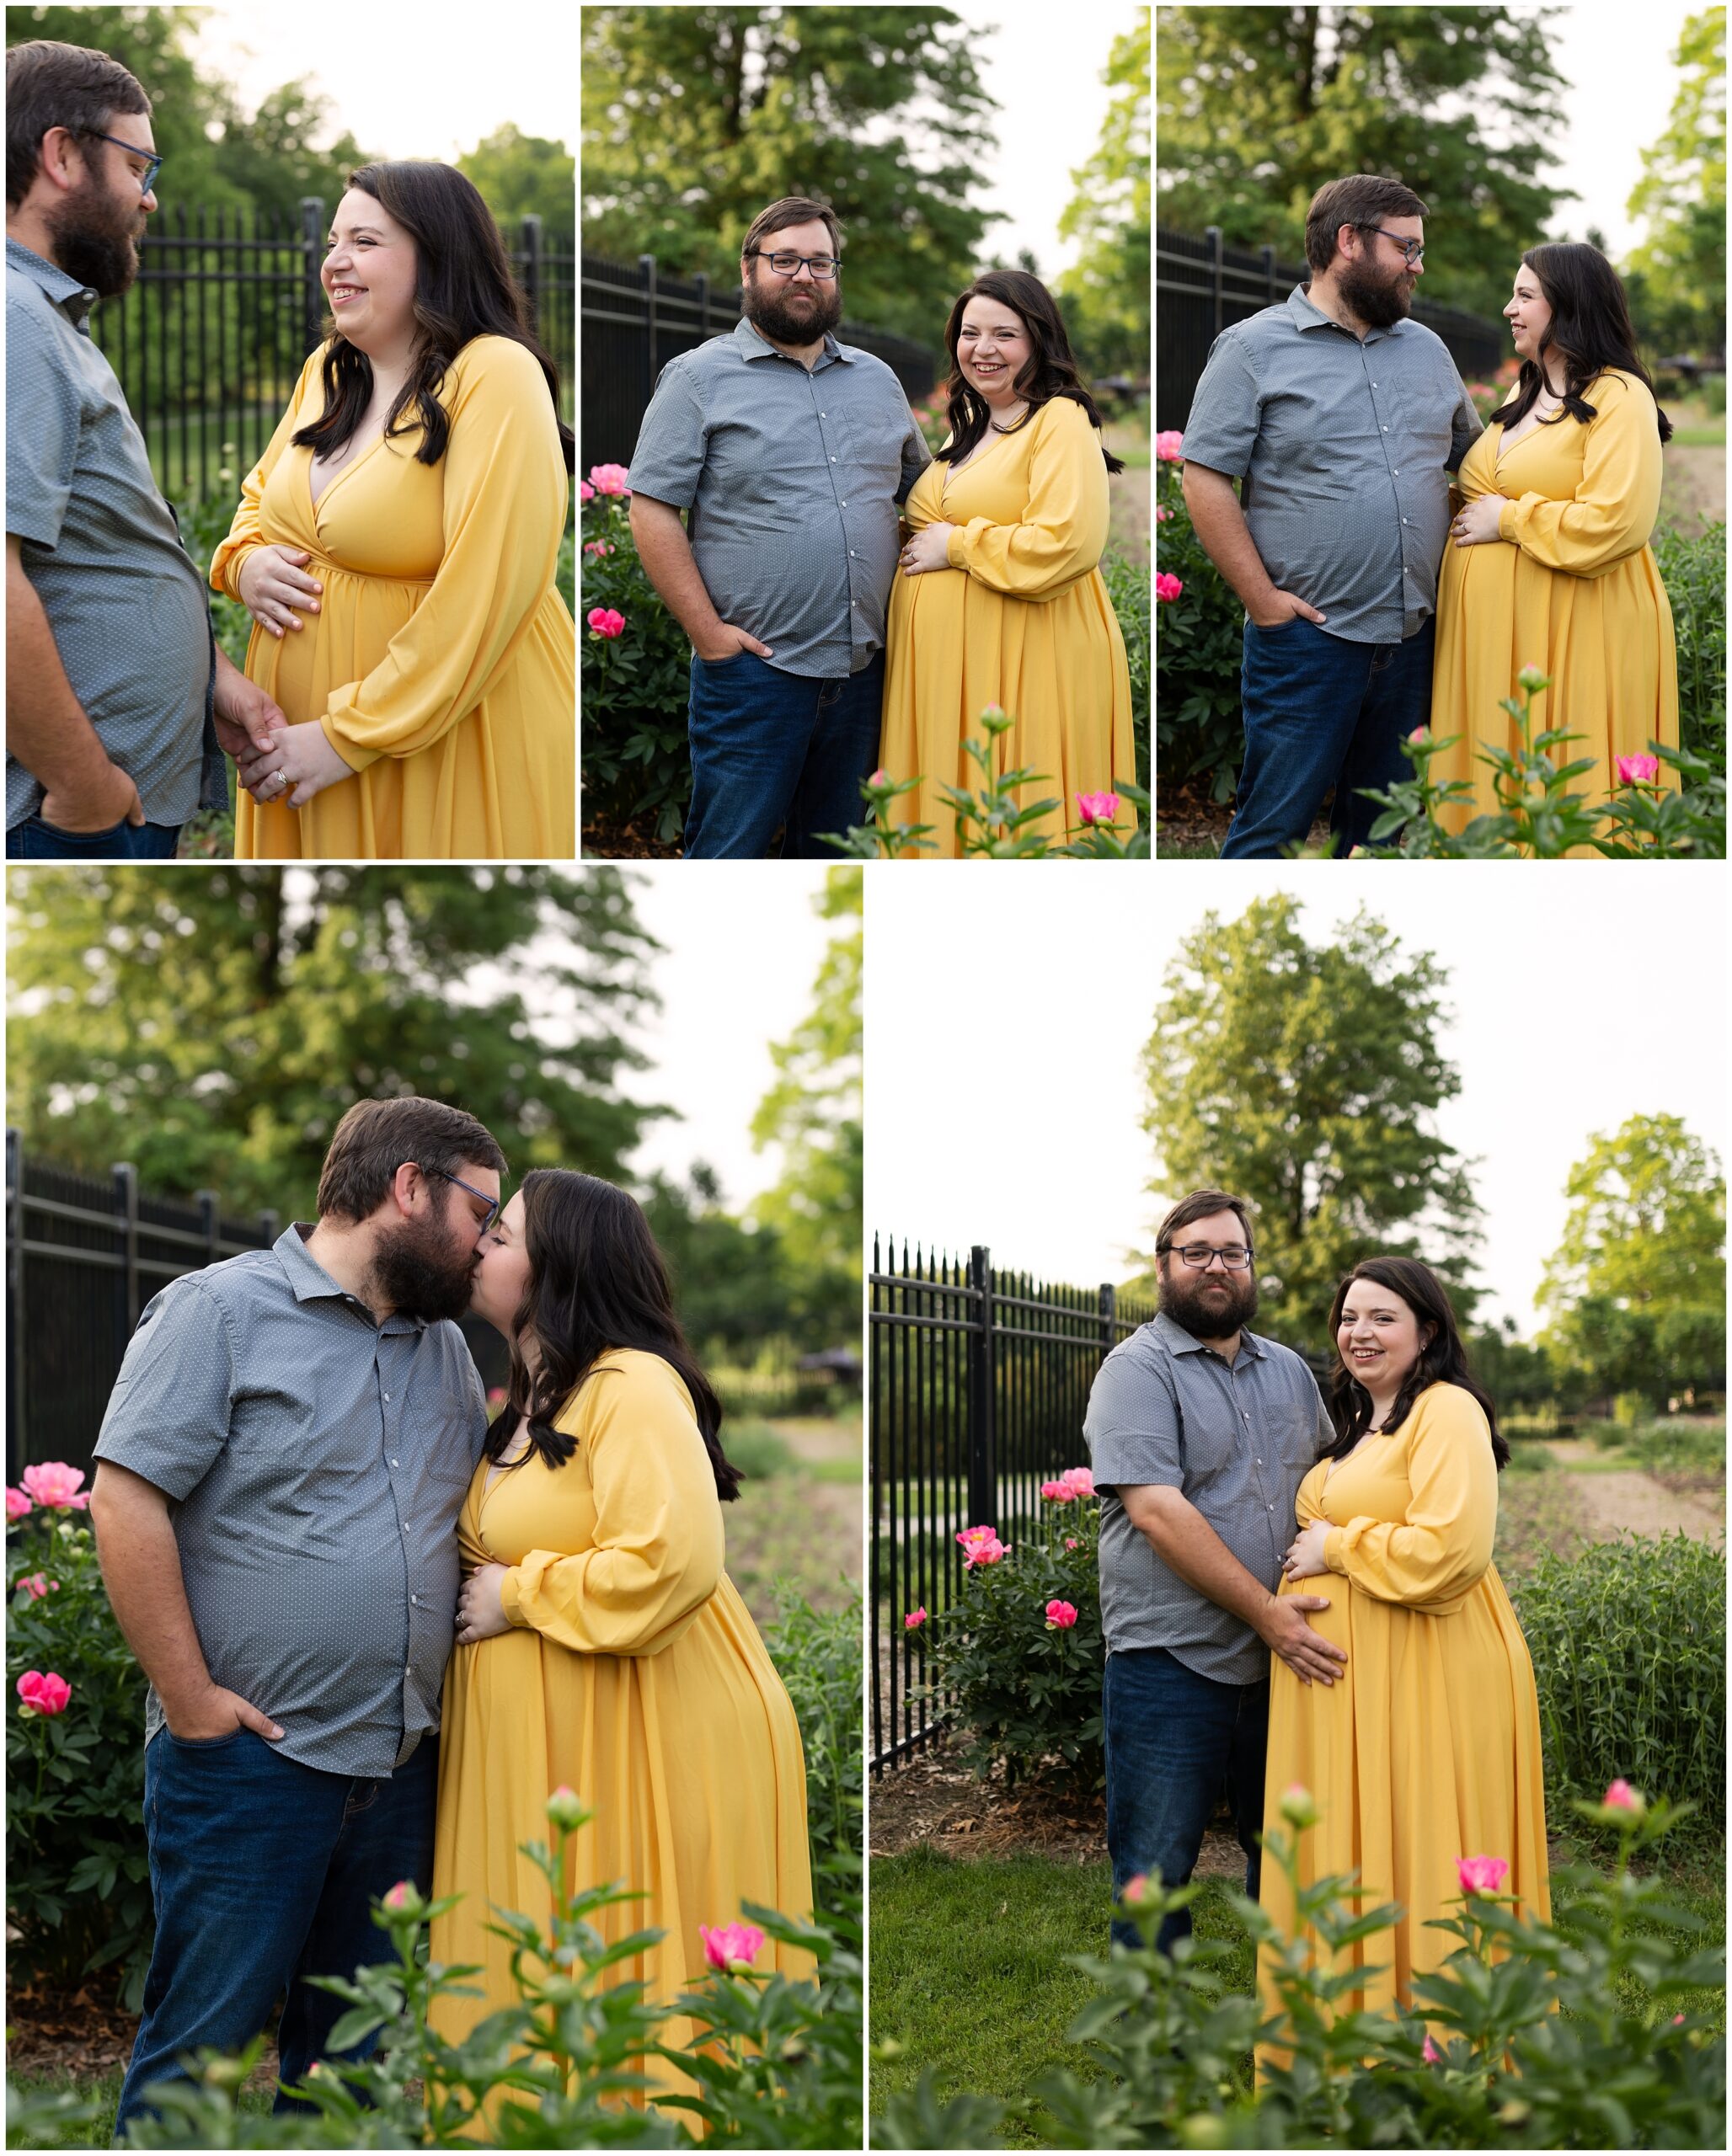 Hartwood Acres Mansion Maternity Session in Pittsburgh PA Photographed by Pittsburgh Maternity Photographer Acevedo Weddings